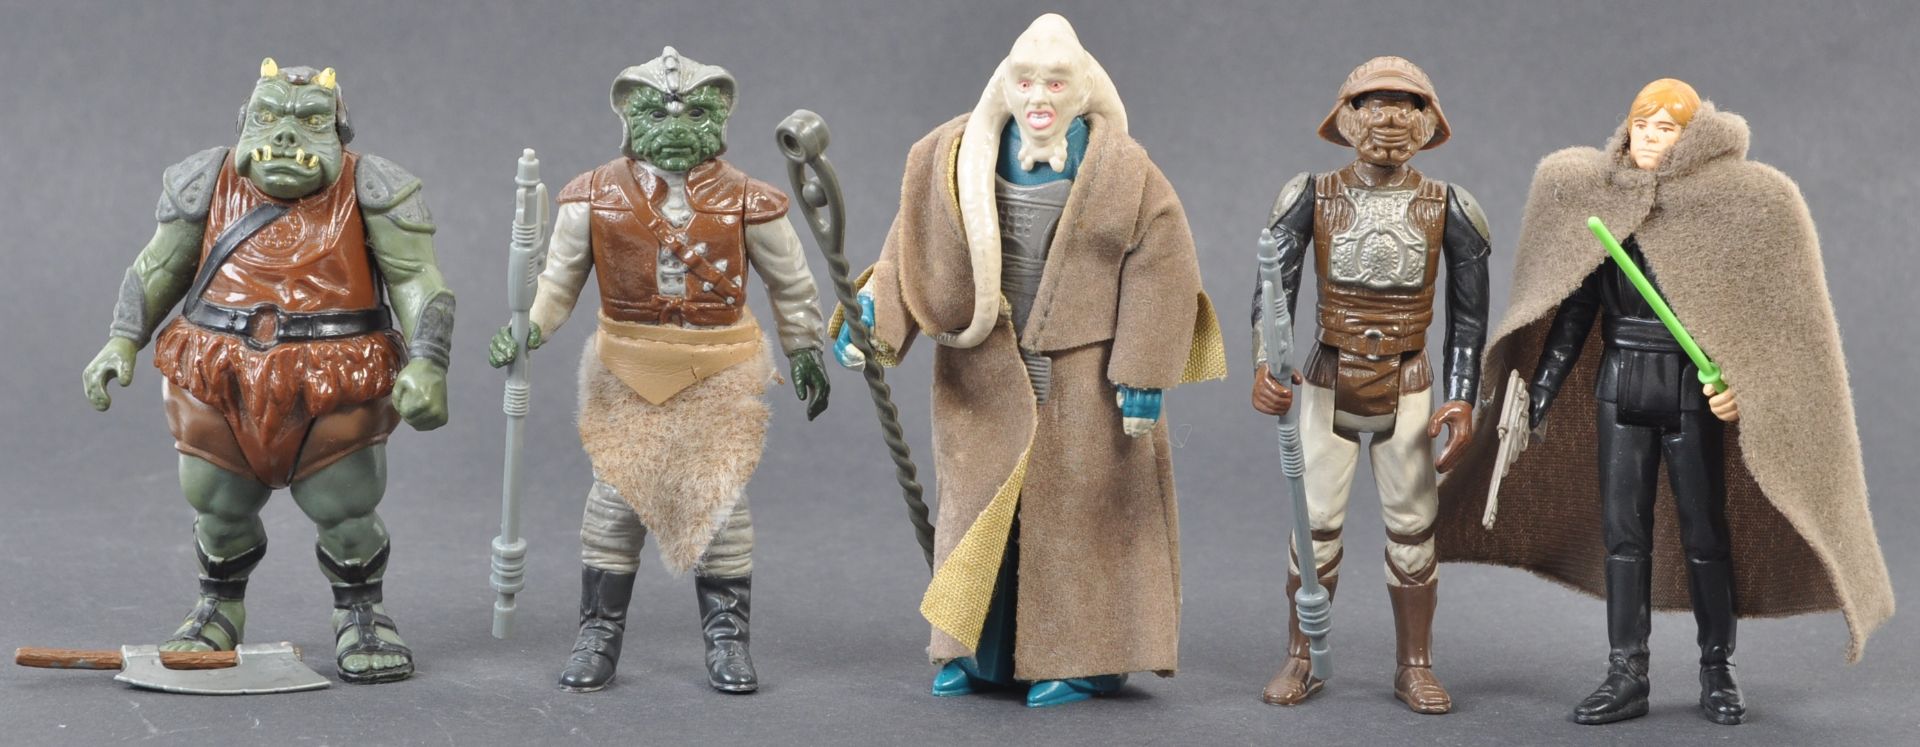 STAR WARS ACTION FIGURES - JABBA'S PALACE FIGURES